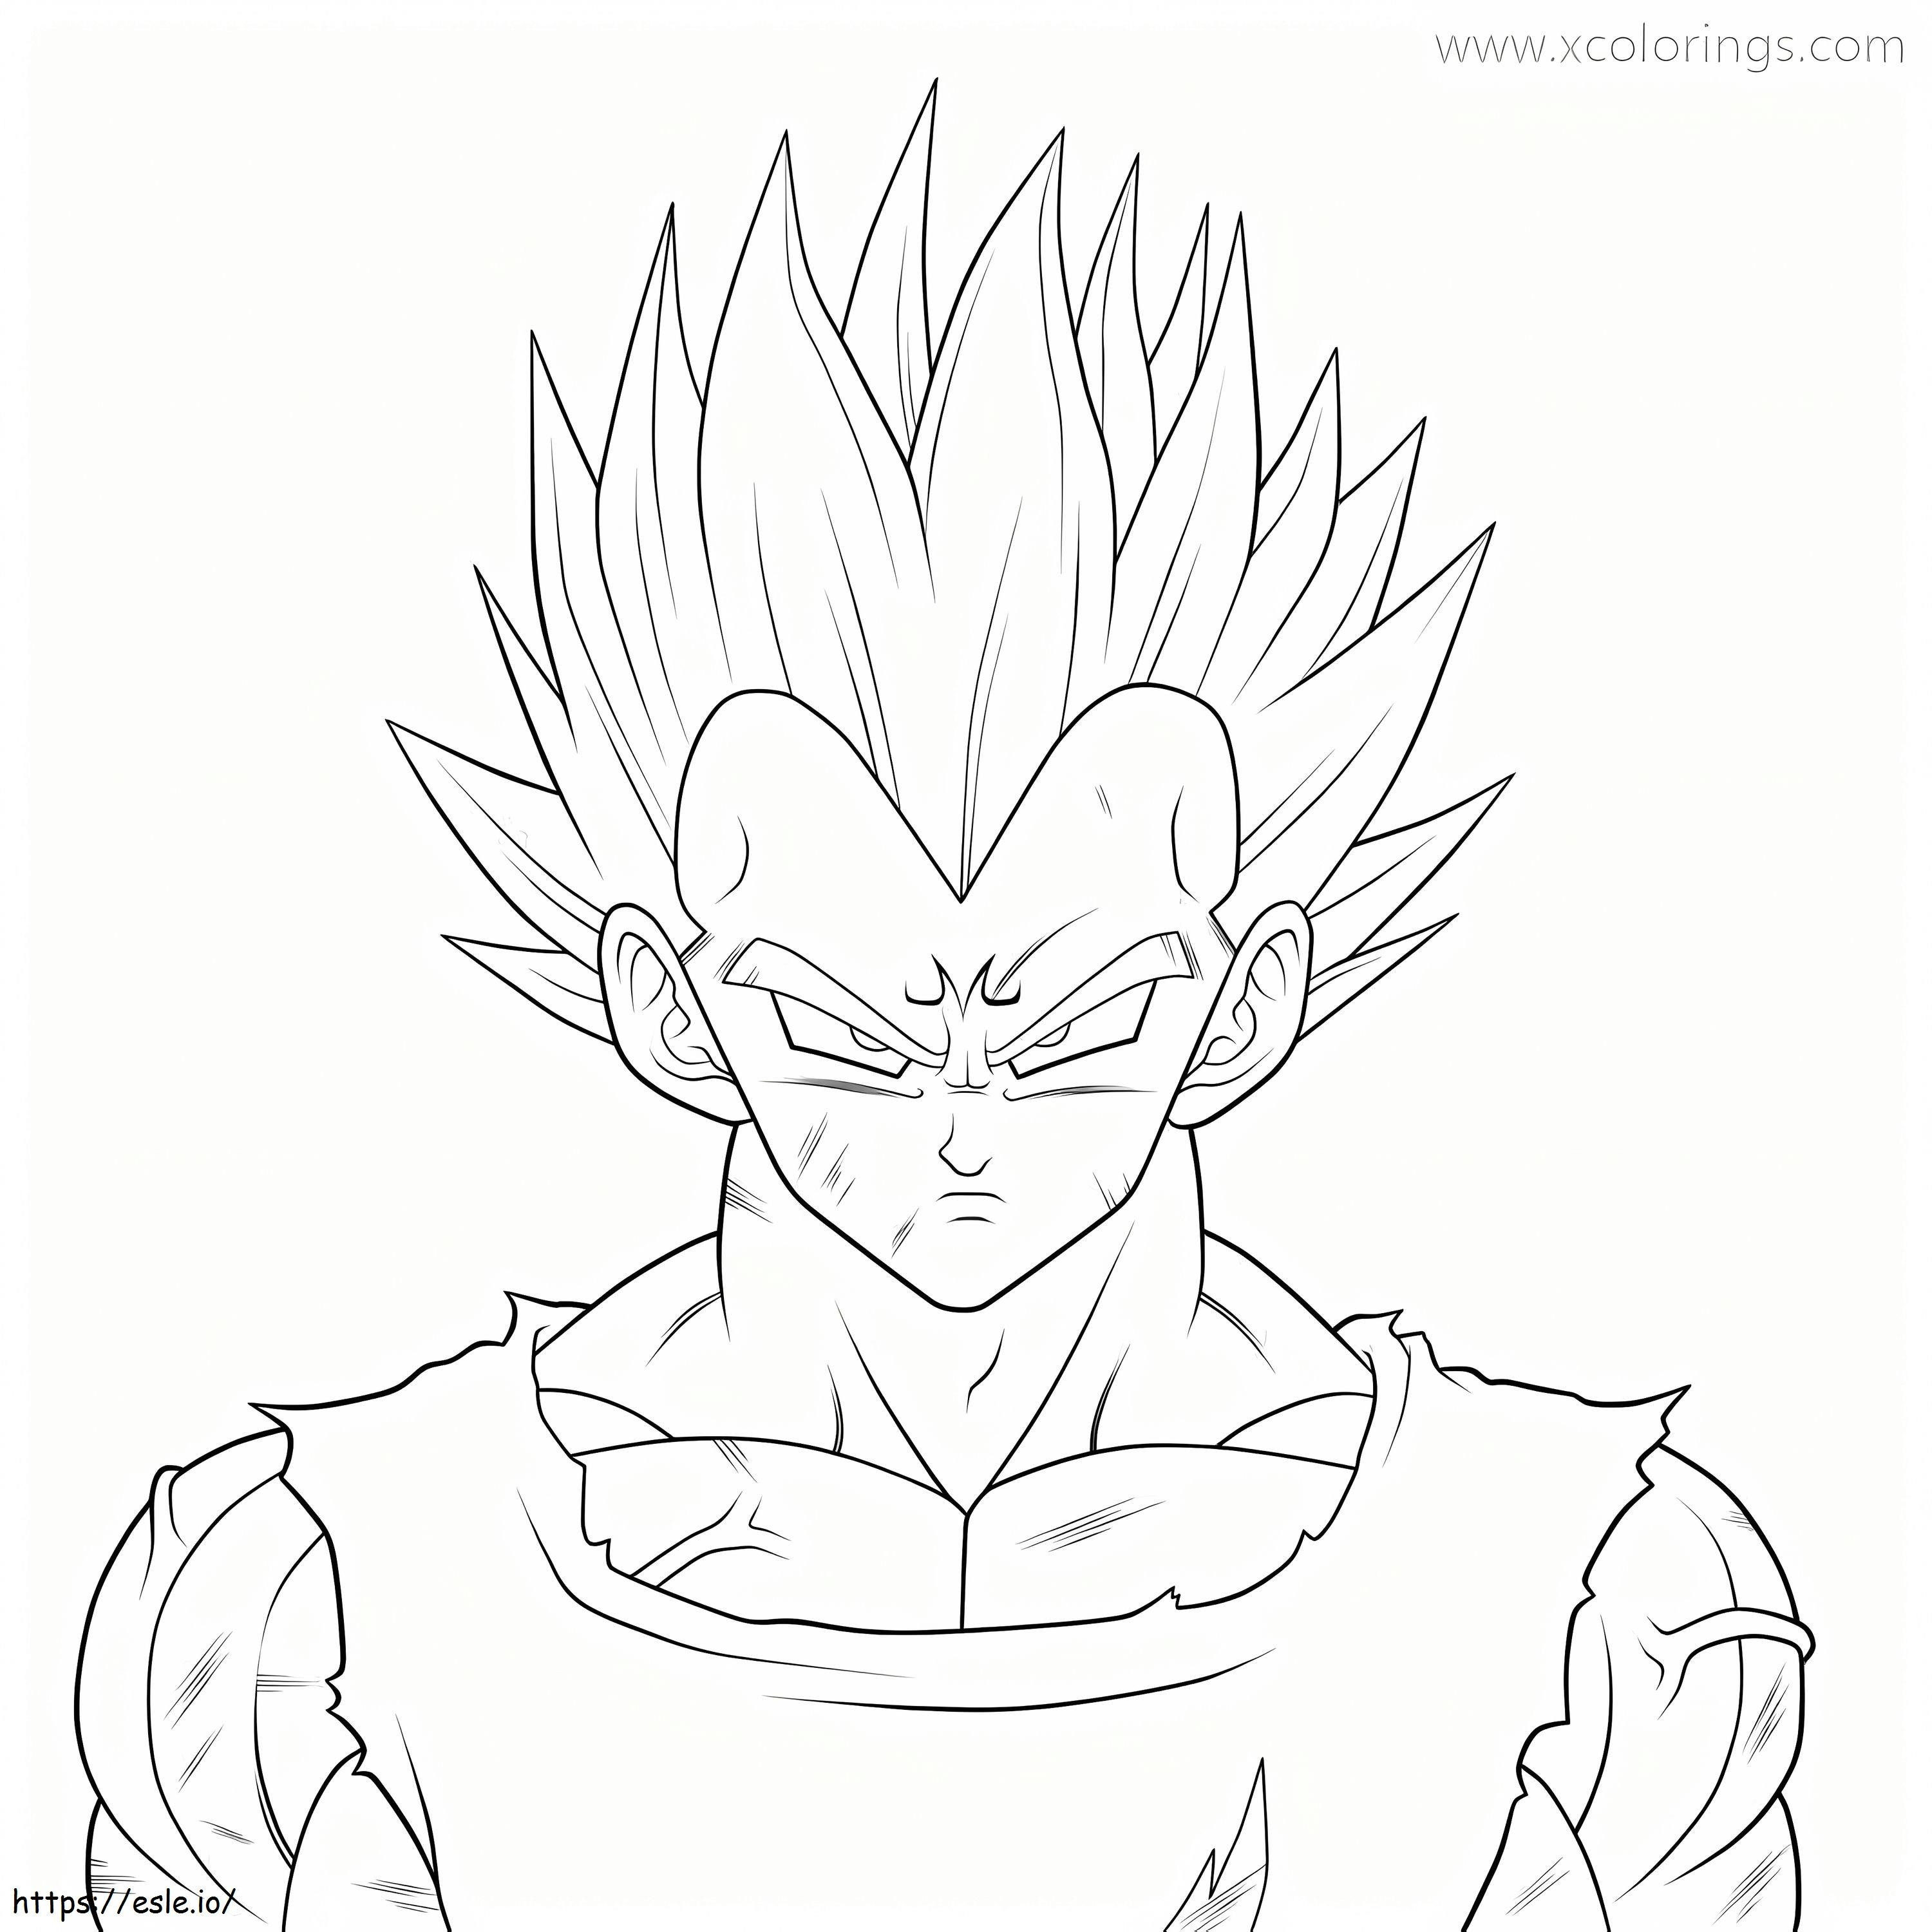 Angry Vegeta Face coloring page